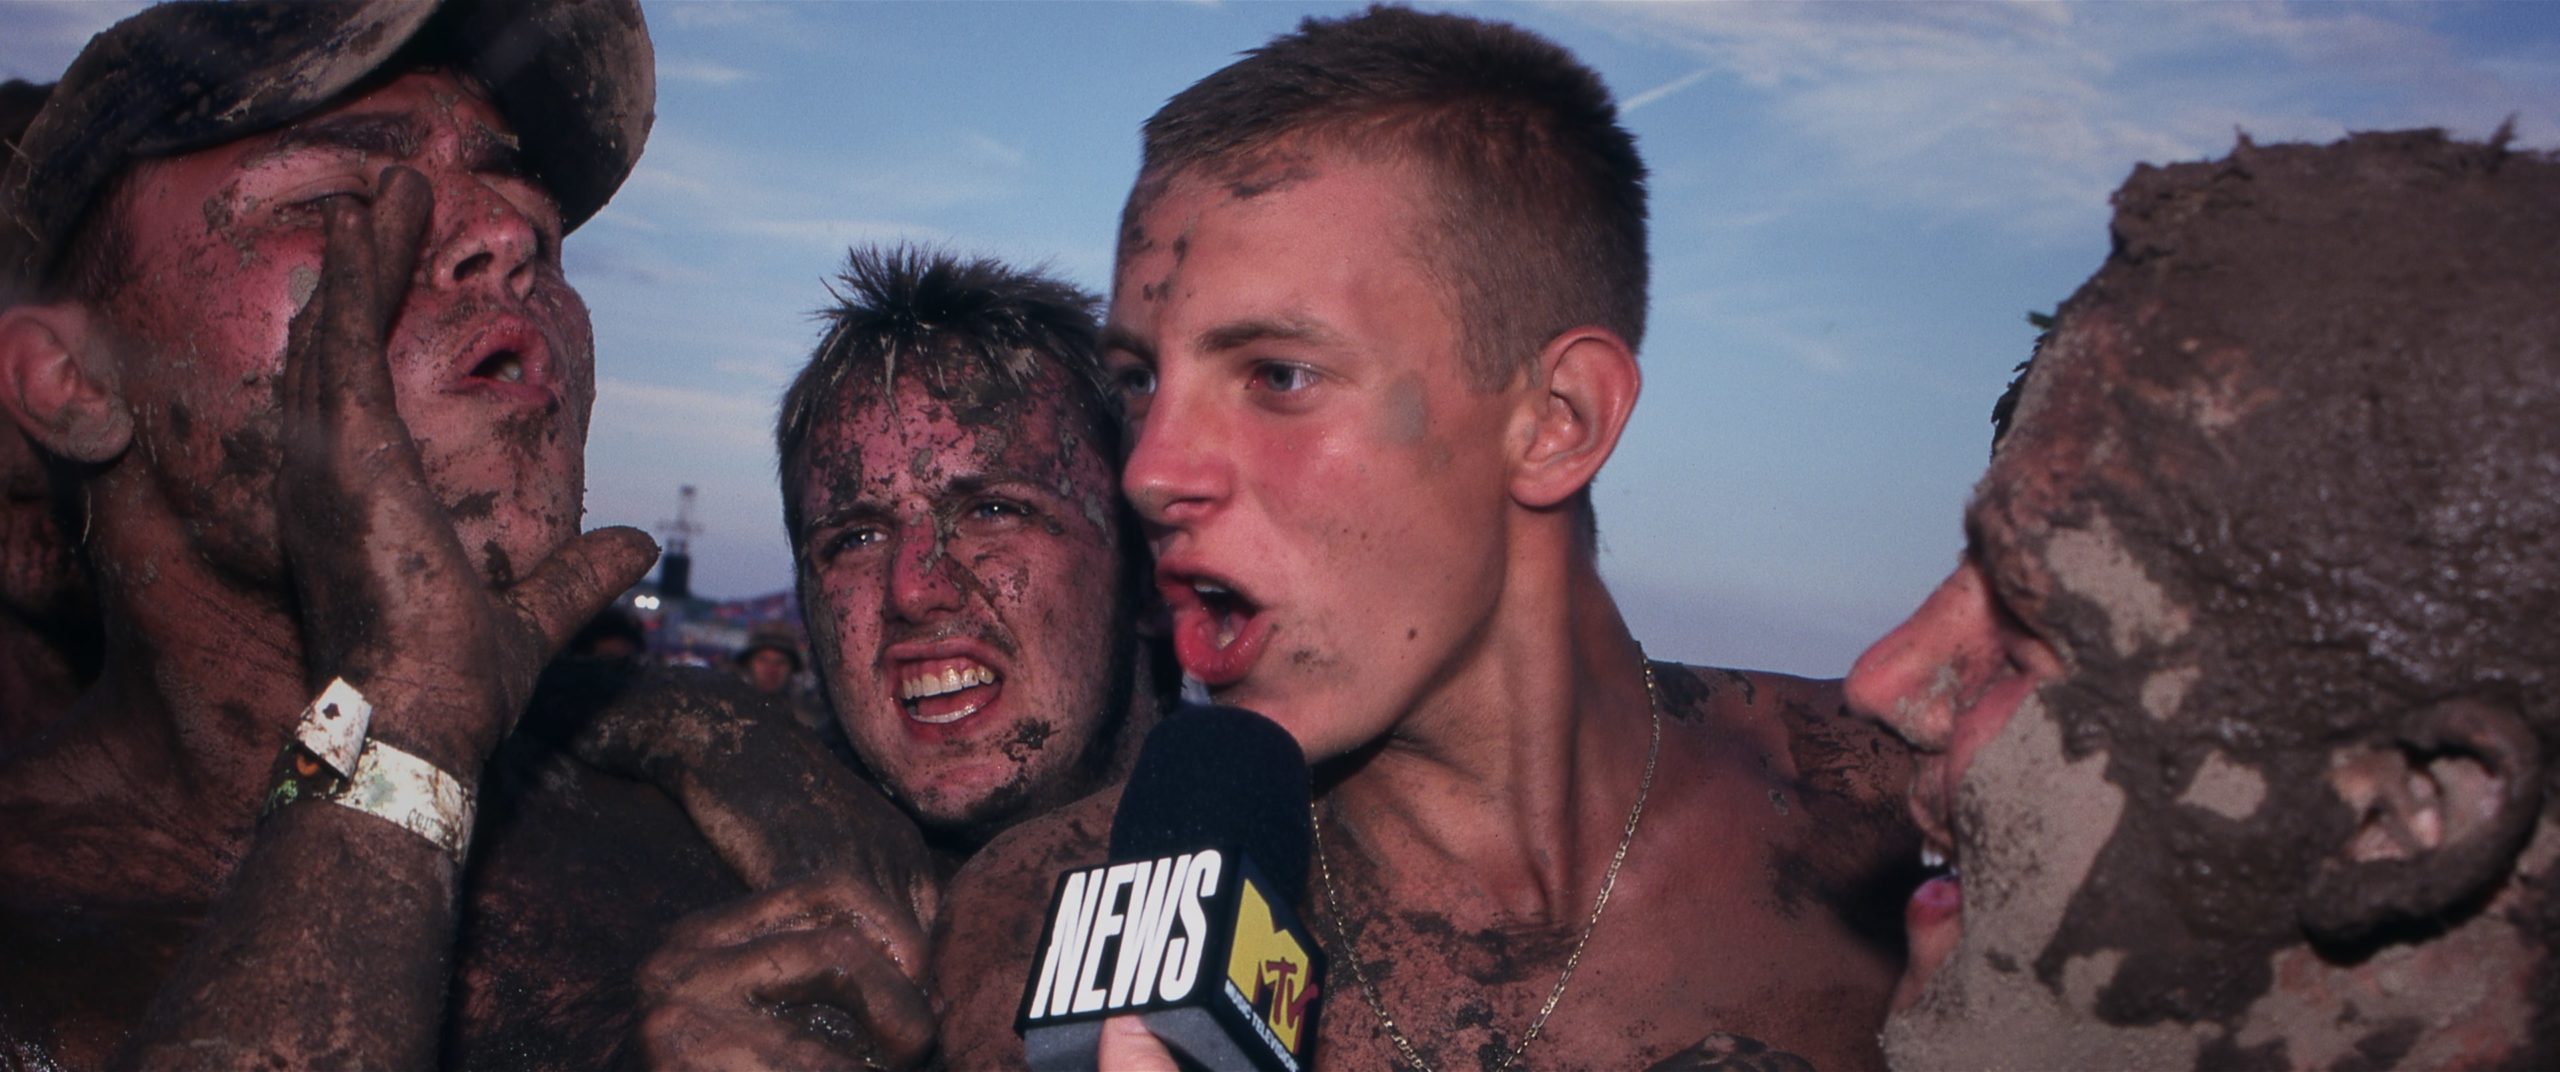 The new Netflix documentary is chaos. “Trainwreck: Woodstock ’99”